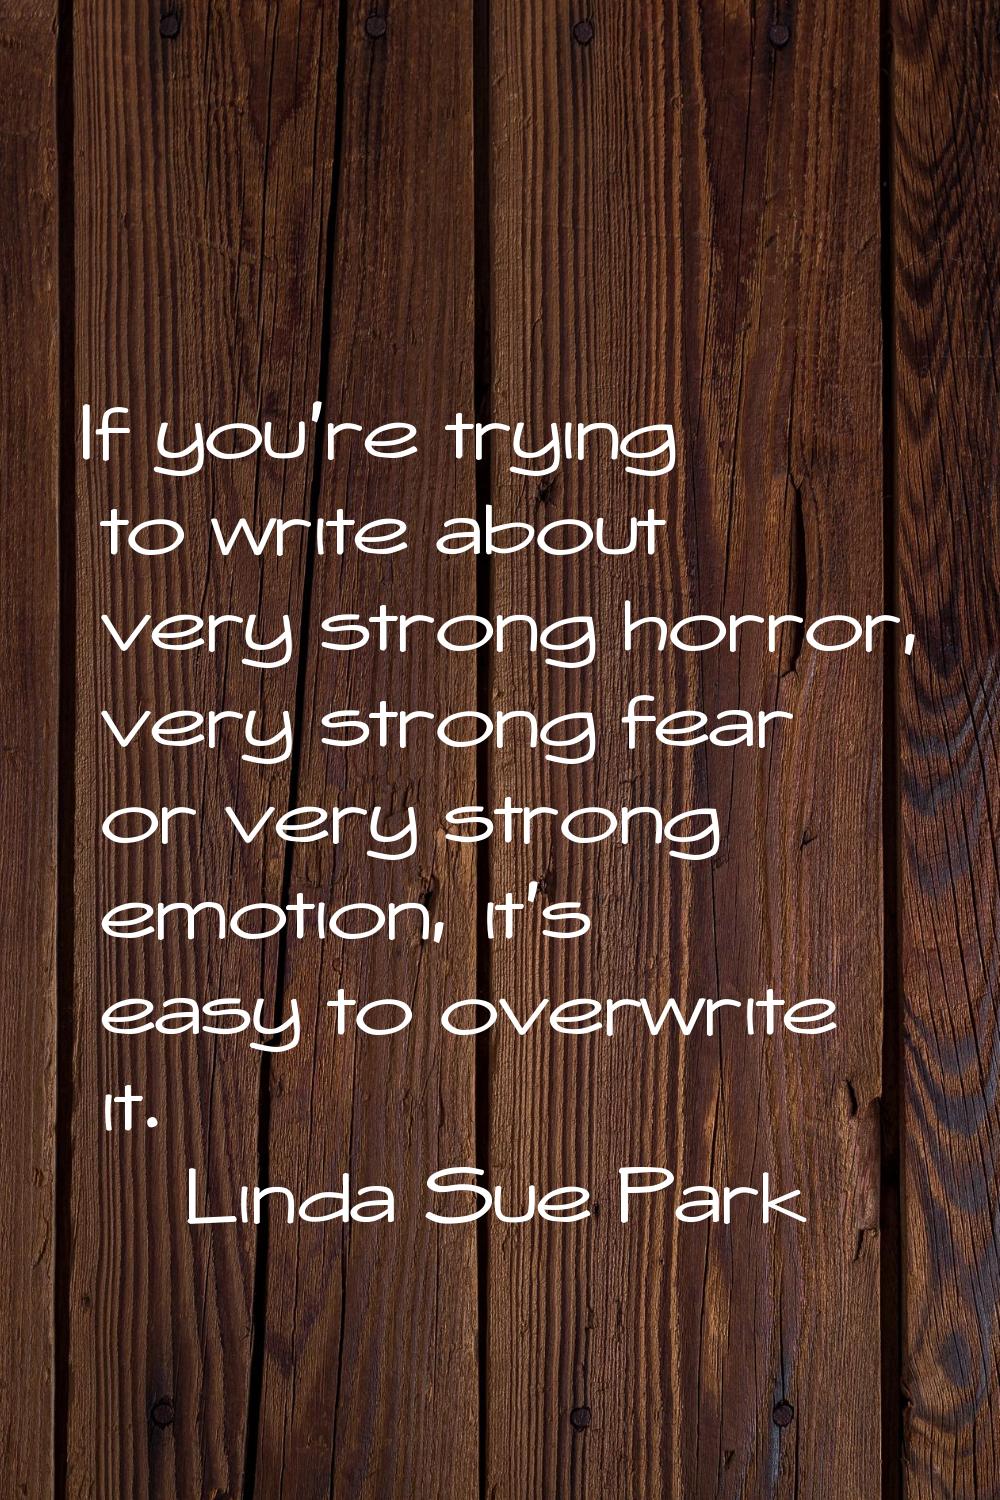 If you're trying to write about very strong horror, very strong fear or very strong emotion, it's e